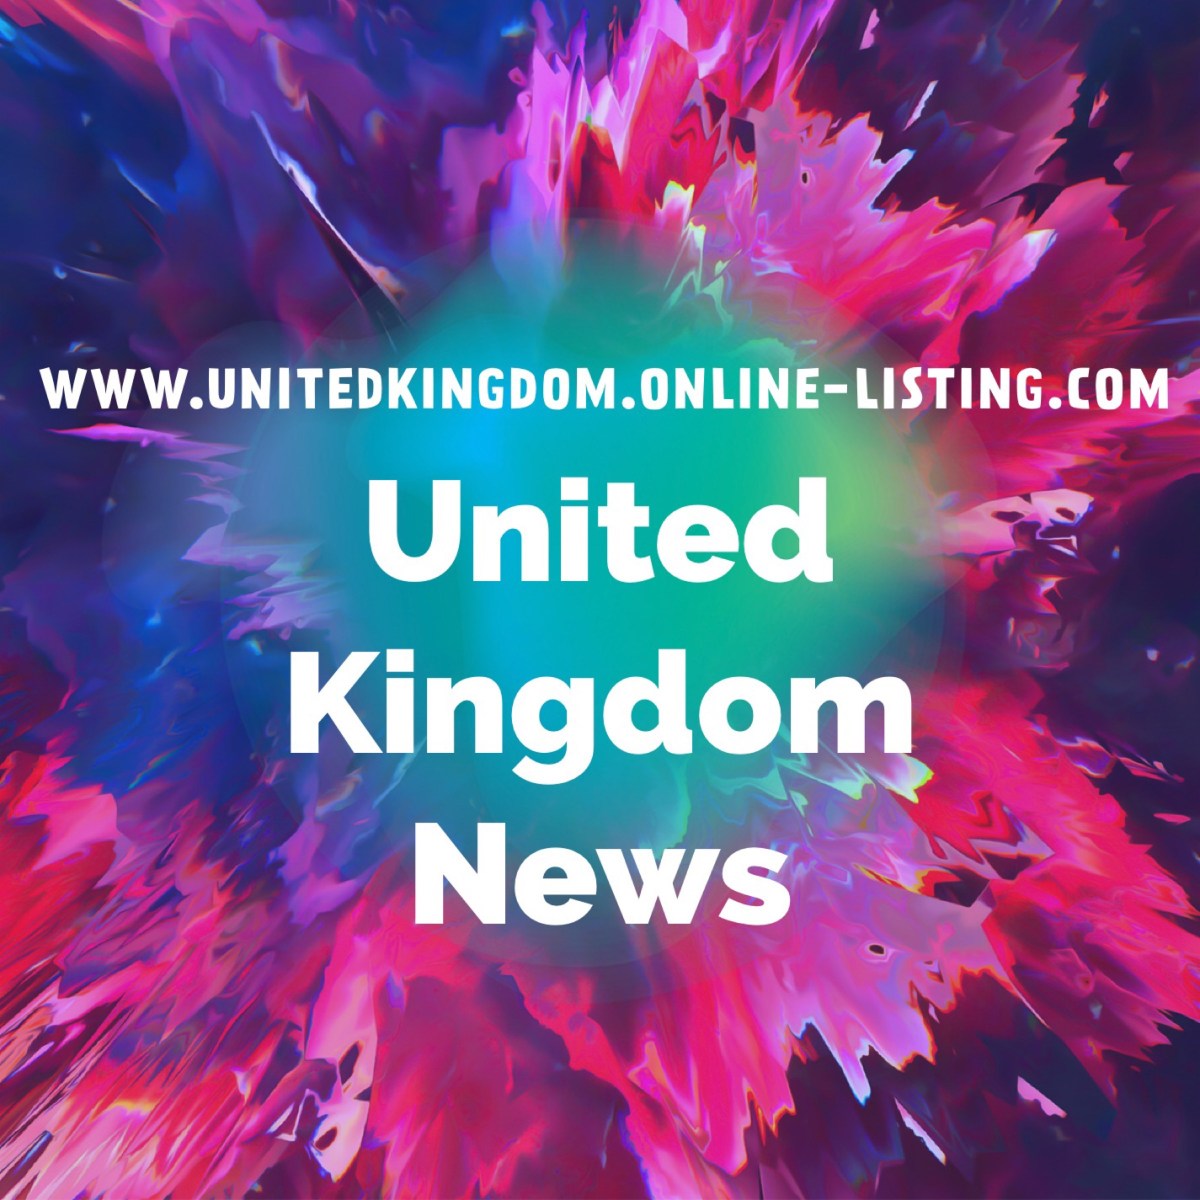 Search United Kingdom Ticket Events Online Listings: Sure, here are some of the top UK ticket event online listings: Ticketmaster is one of the most popular ticket websites in the UK. It offers a… #OutdoorTickets #TicketEvents #UKCheapTickets #UKTickets  dlvr.it/Sq4trv